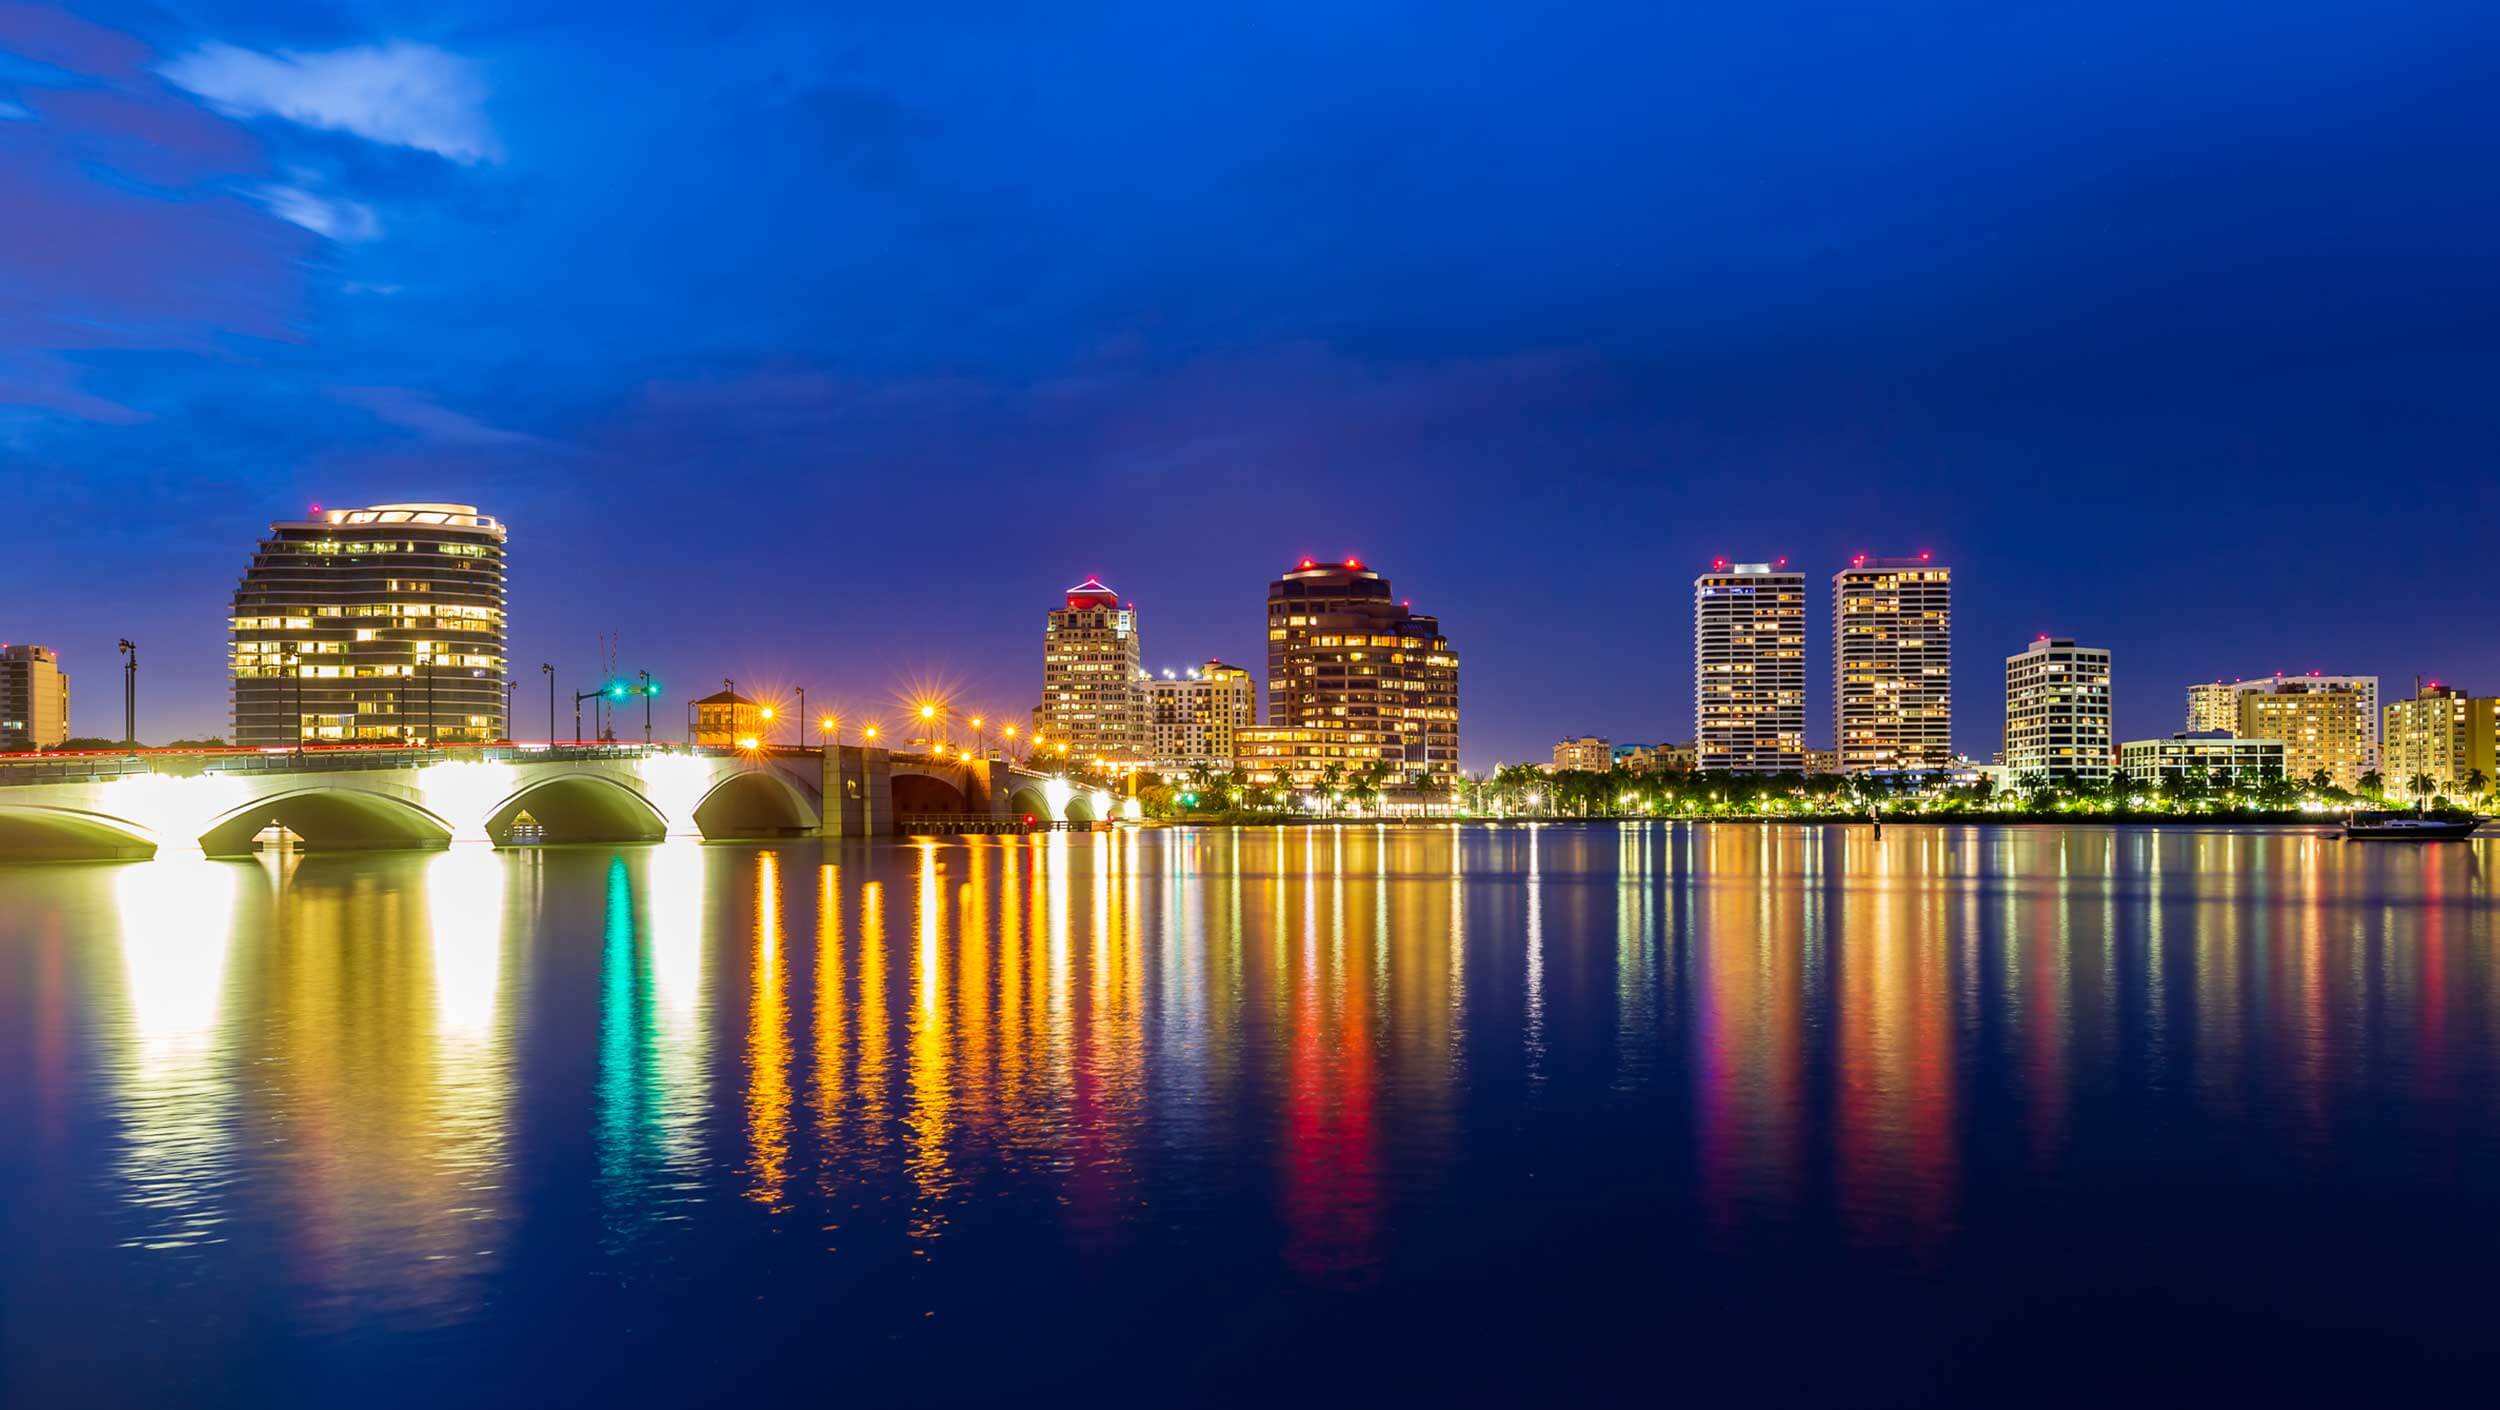 The West Palm Beach, Florida skyline reflected over a body of water